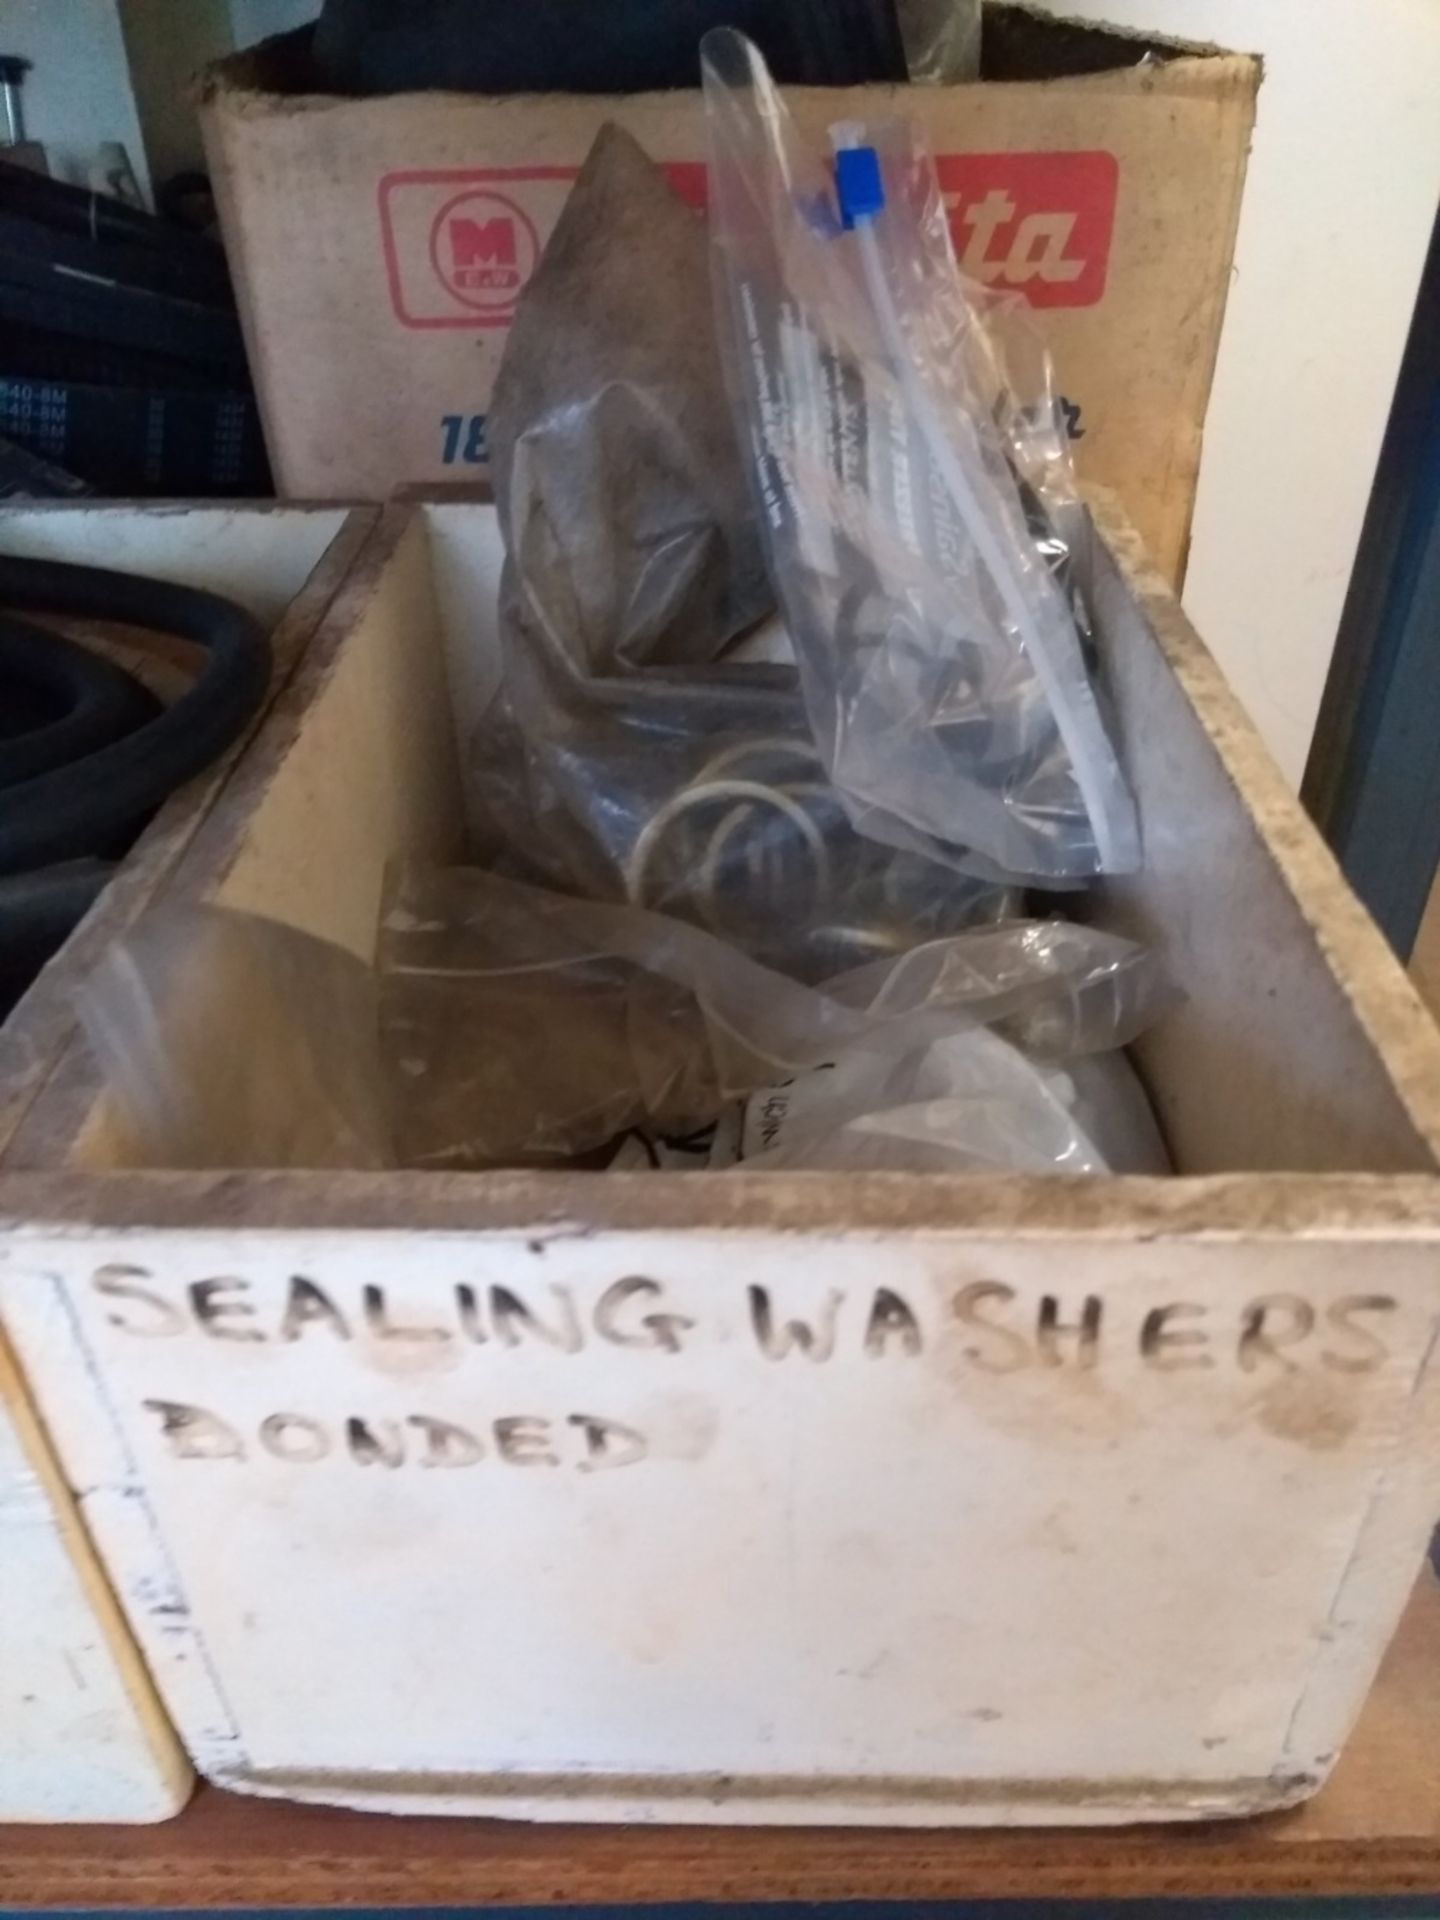 Box of Seal Washers